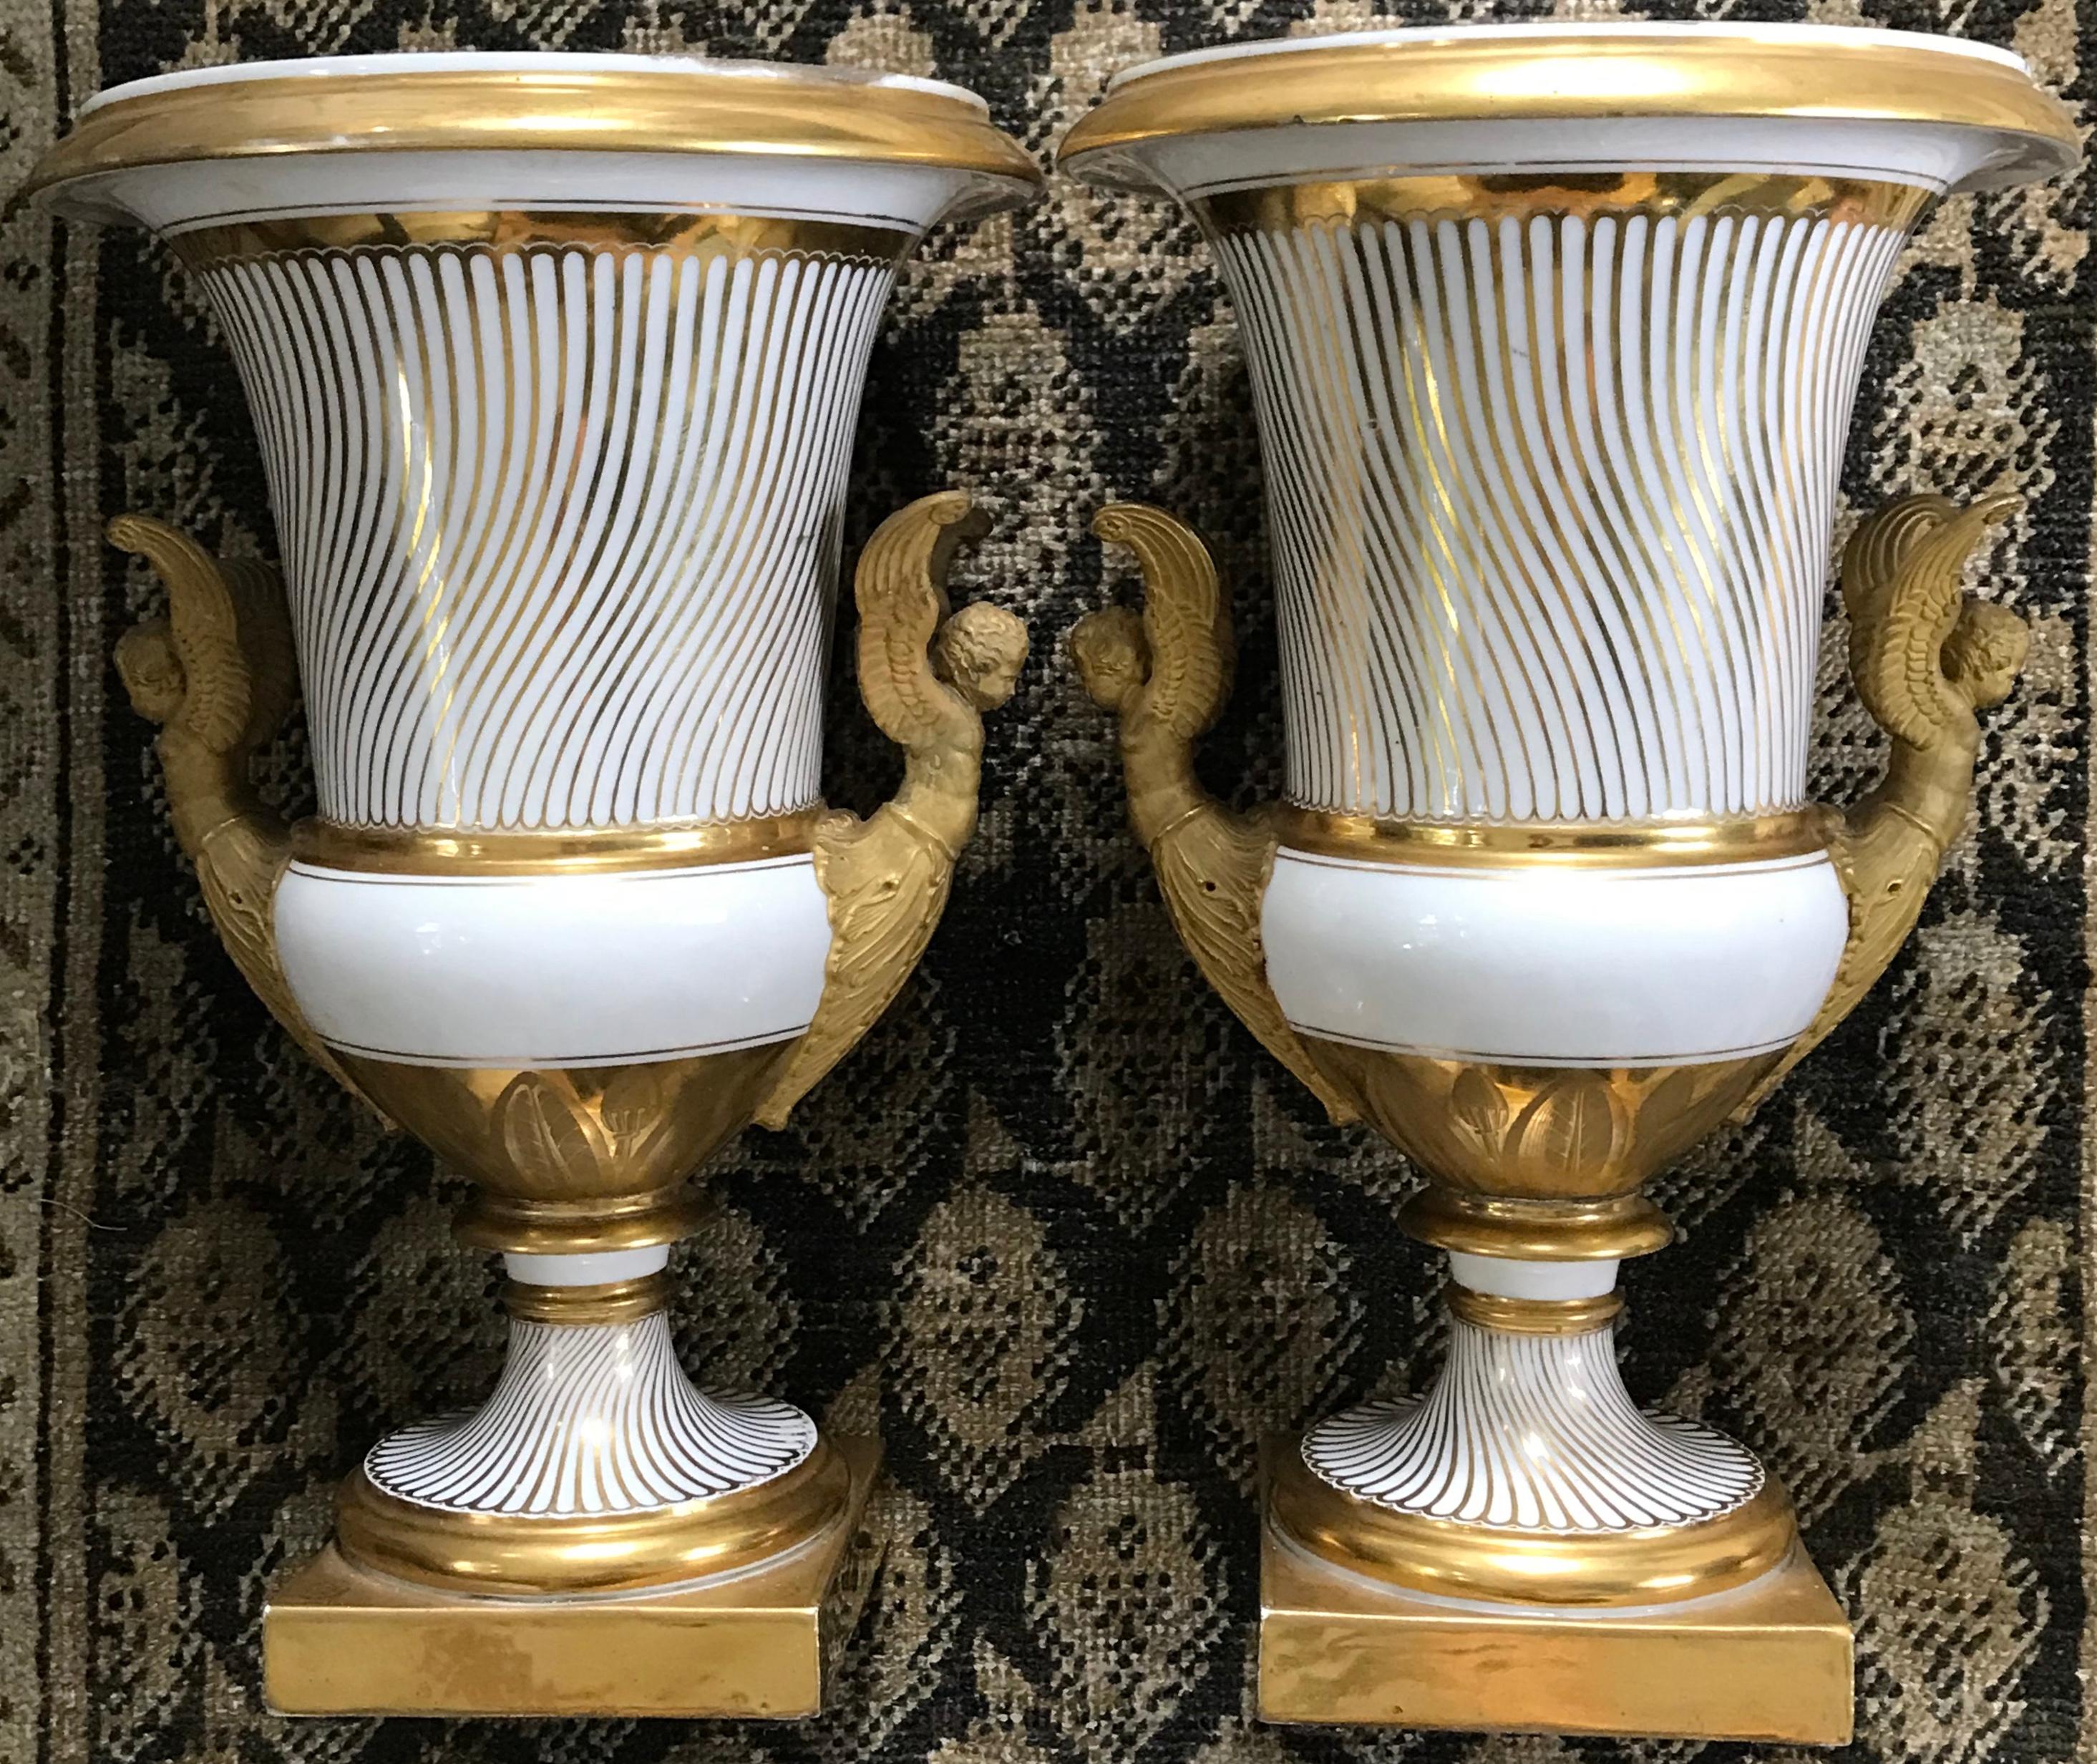 Pair neoclassical Paris Porcelain gilt vases. Exceptional pair of large white and gilt painted campana form urns with strigilated patterning on body down to gilt banded white base above gilt patterned olive and leaf banding with further strigilation